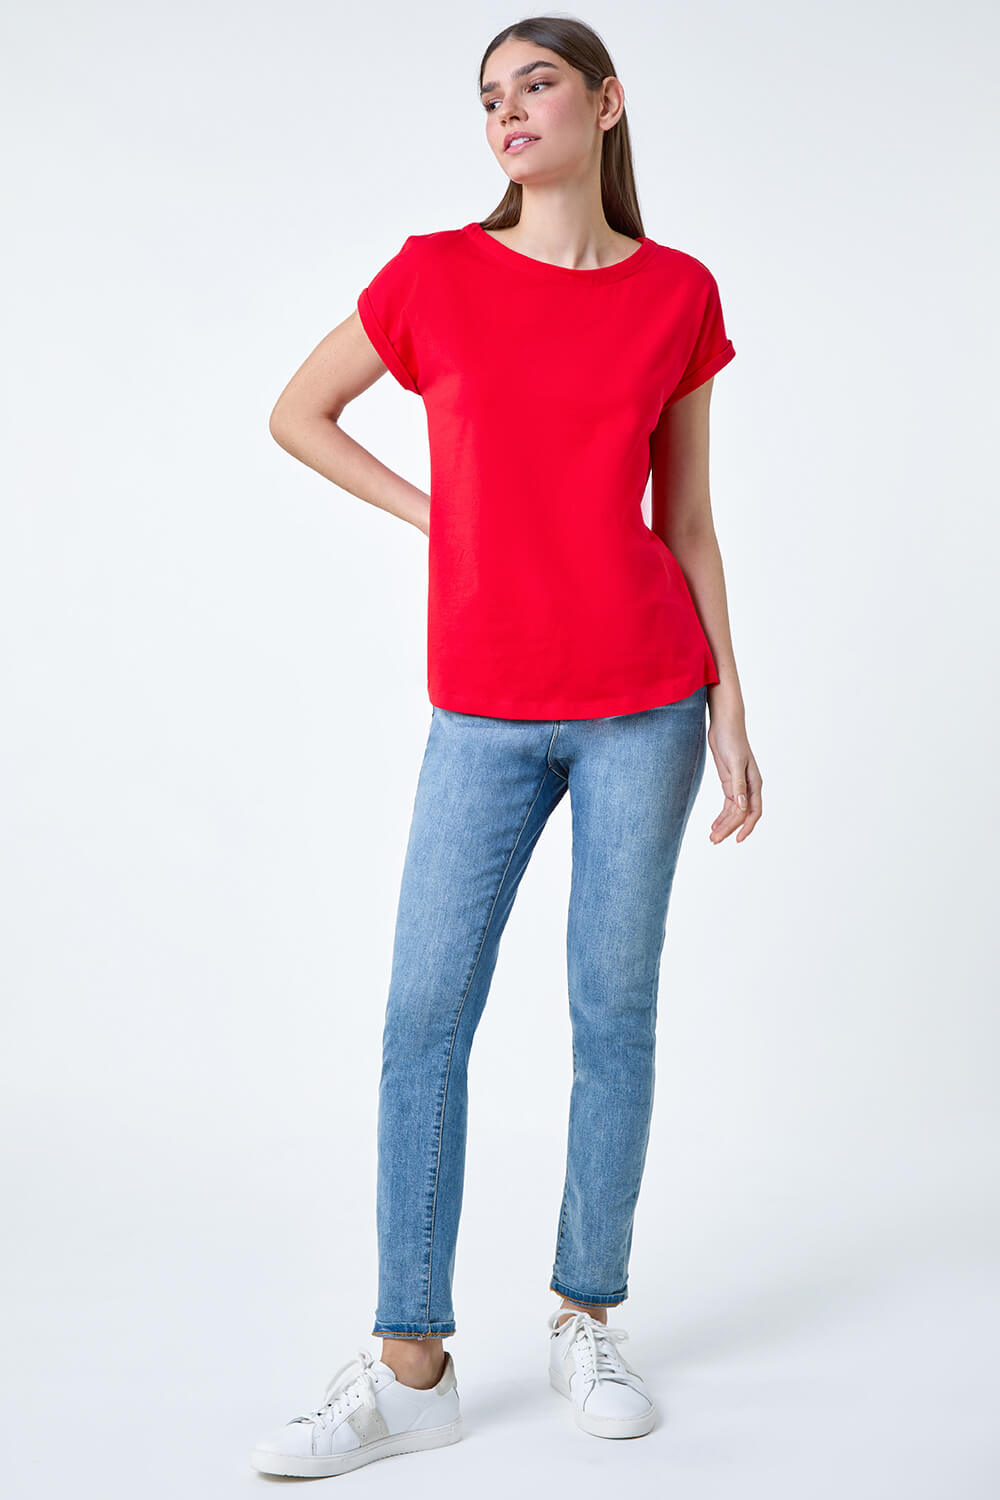 Red Plain Stretch Cotton Jersey T-Shirt, Image 2 of 5